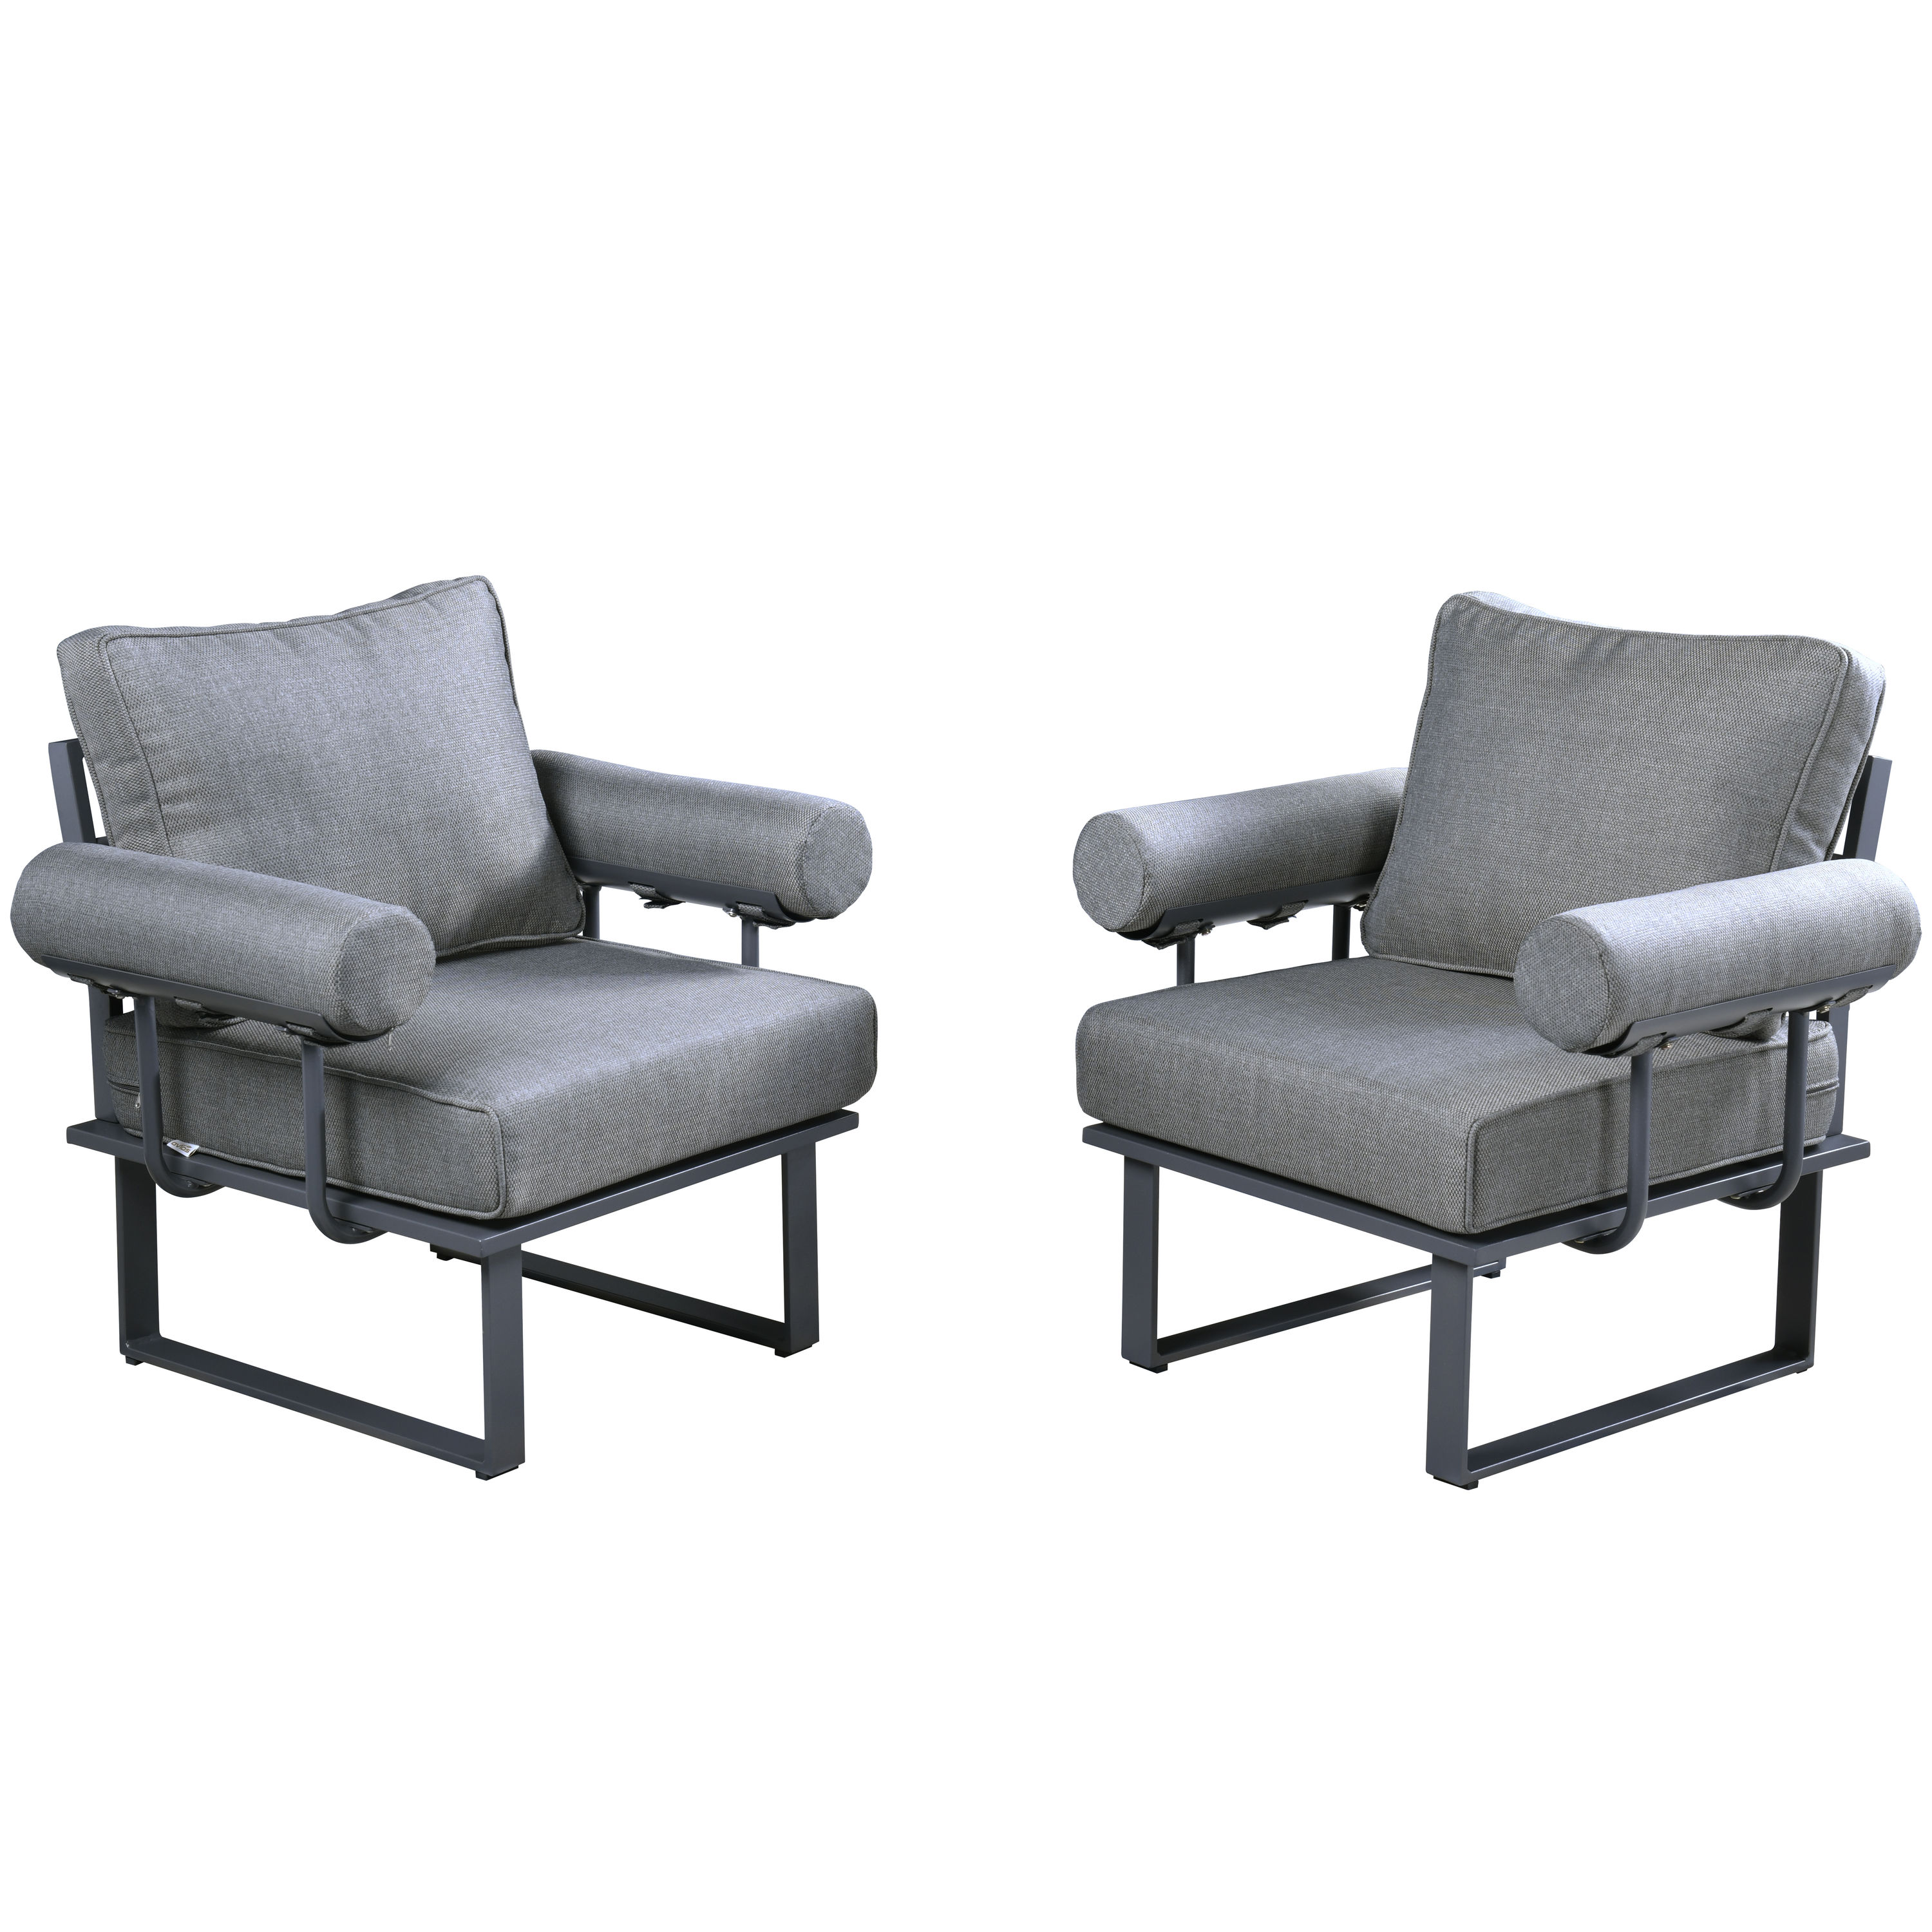 XIZZI Athena Set of 2 Stationary Balcony Chair with Gray Cushioned 